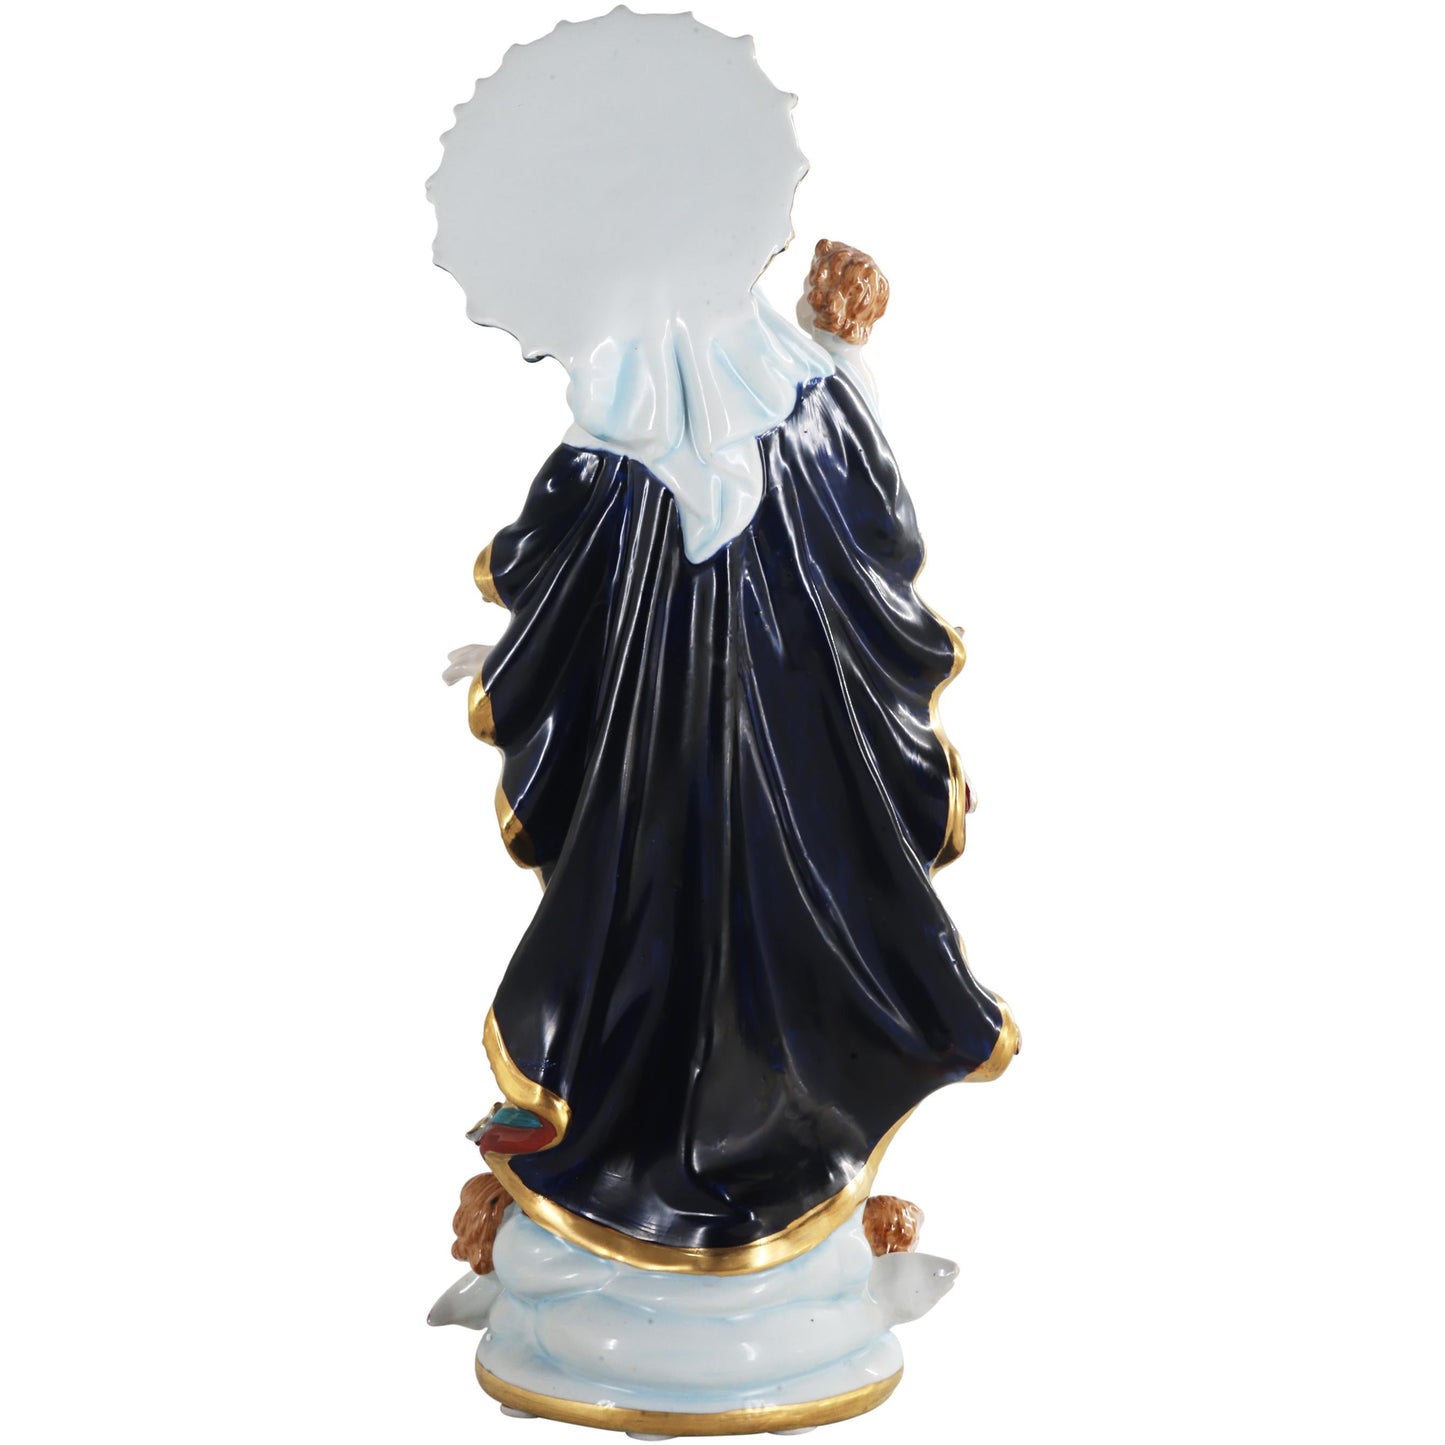 Late 20th Century Mary and Child Porcelain Figurine